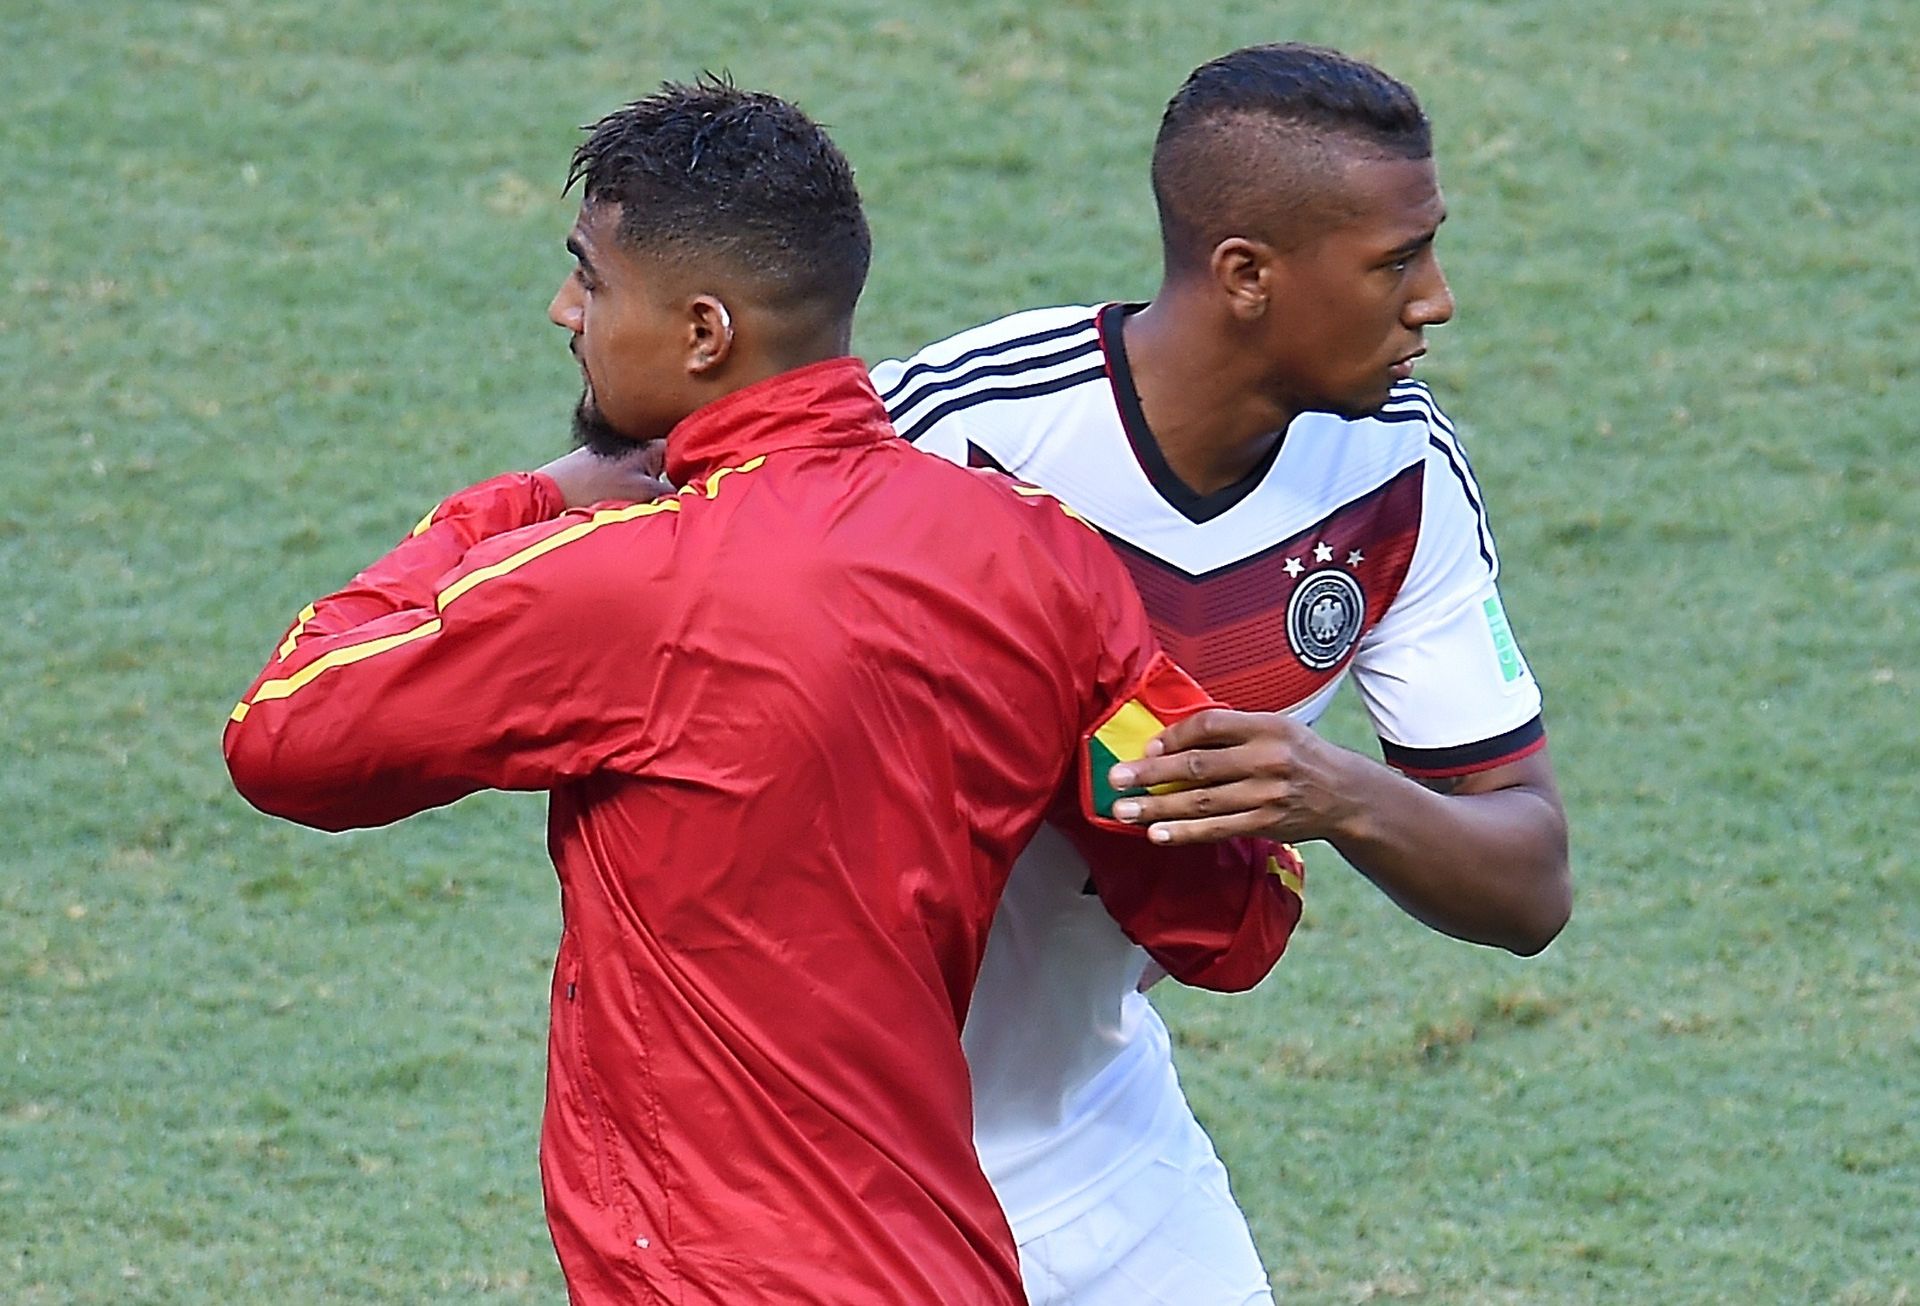 <p>                     At the 2010 World Cup, history was made as brothers Kevin-Prince Boateng and Jerome Boateng lined up on different sides for a group match between Ghana and Germany. The Europeans won the match 1-0.                   </p>                                      <p>                     Four years later, the two teams met again at the 2014 World Cup. Again, the two half brothers featured – this time in a 2-2 draw. Centre-back Jerome had the more successful career, winning the World Cup in 2014 and spending 10 seasons at Bayern Munich. Kevin-Prince, by contrast, won only 15 caps for Ghana, but did play for some big clubs in a colourful career – including AC Milan, Tottenham, Fiorentina and, briefly, Barcelona.                   </p>